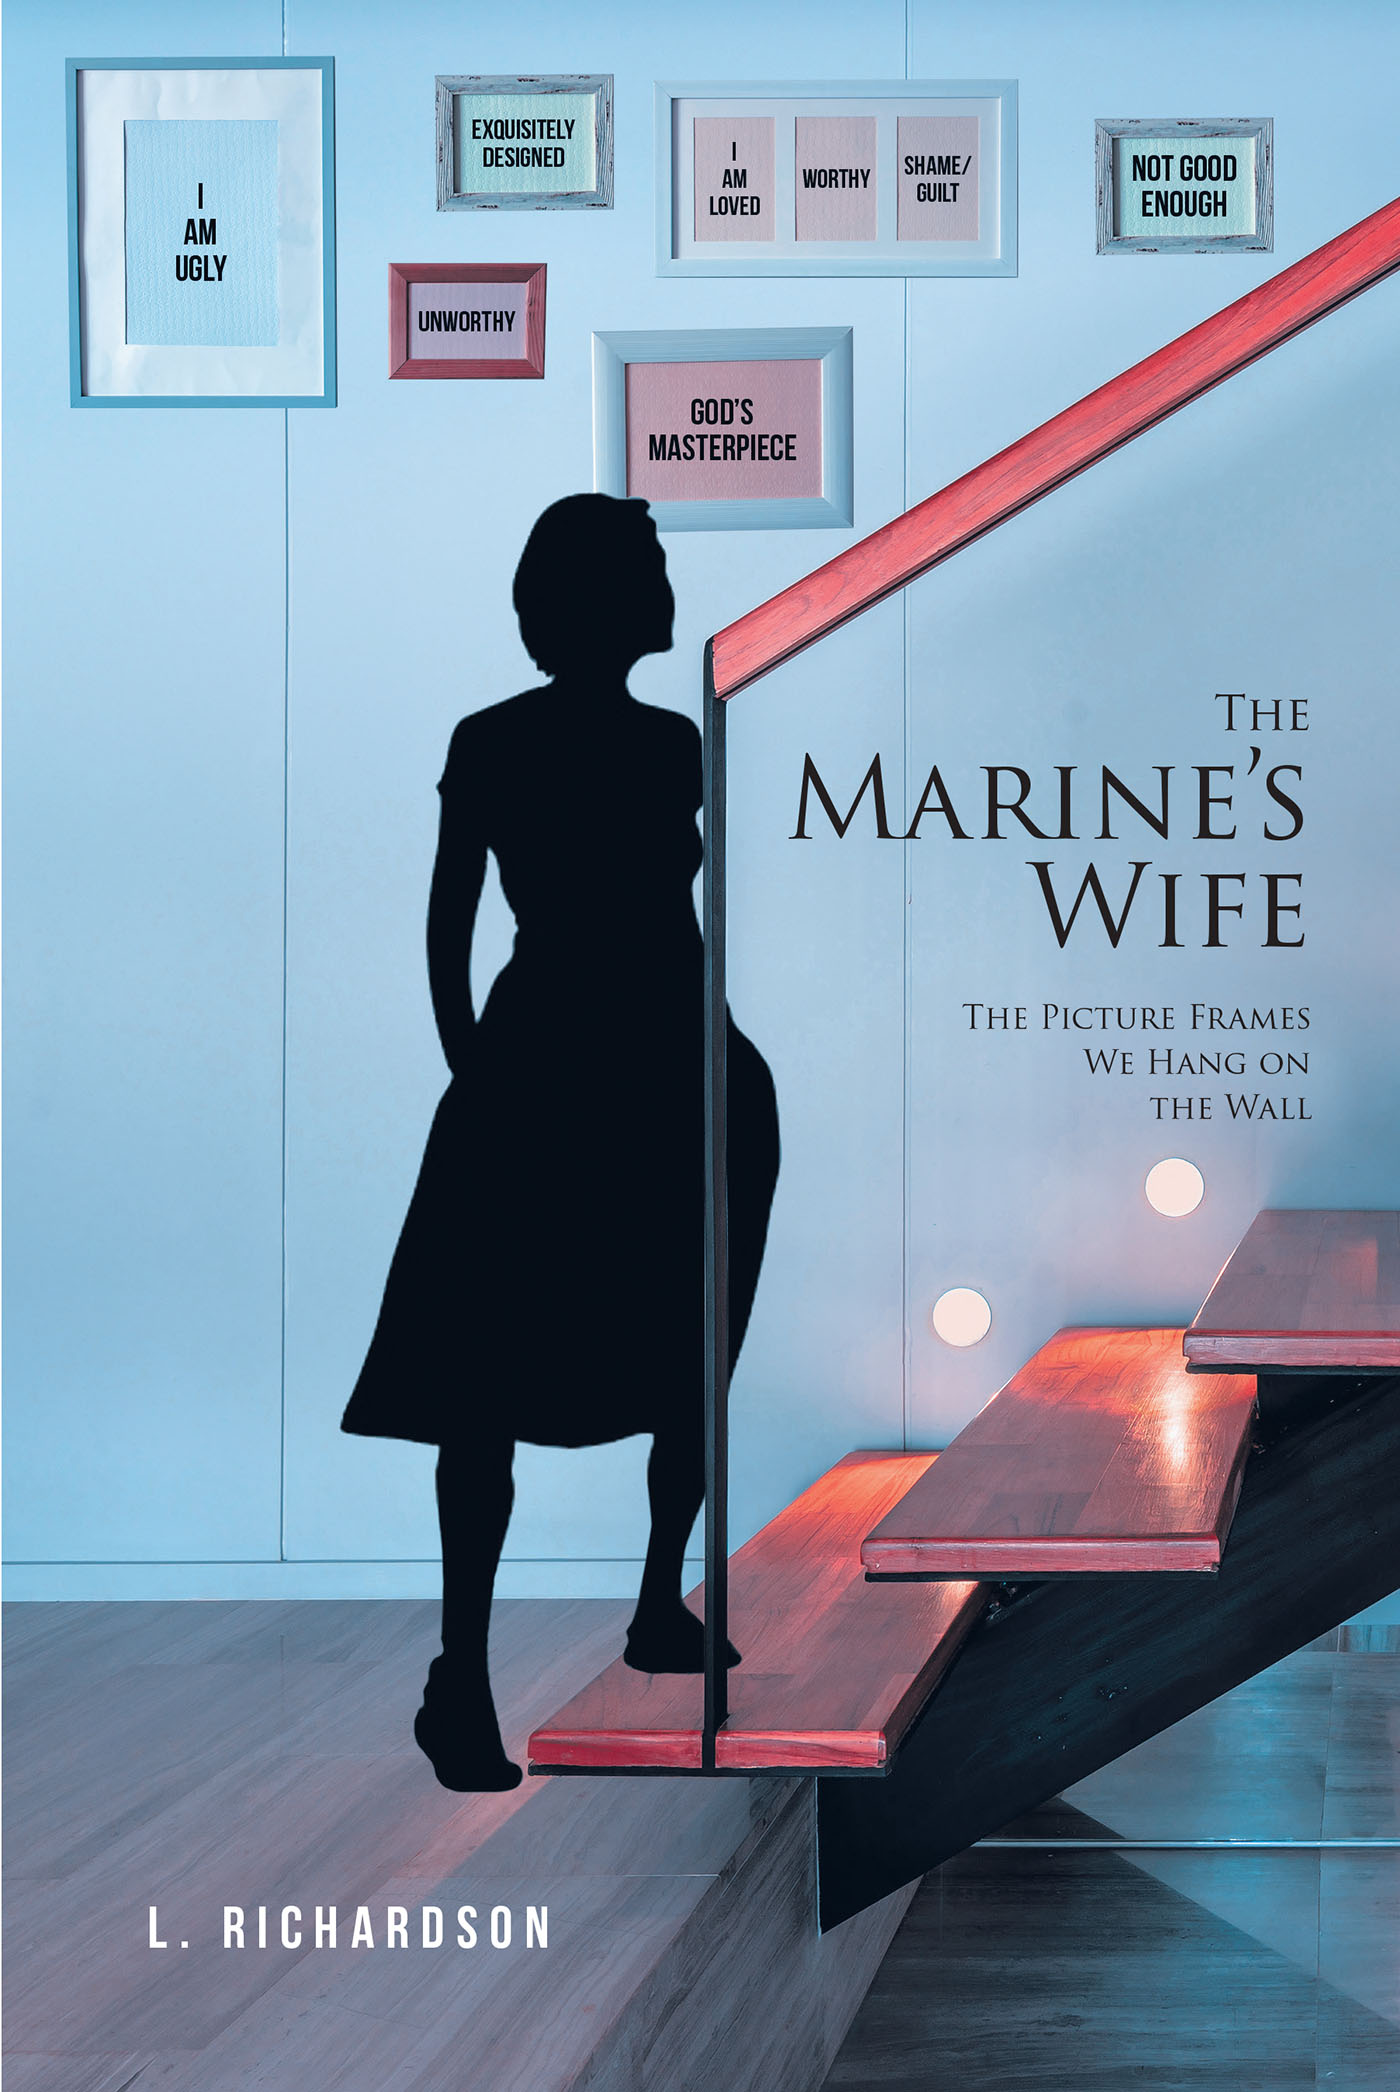 L. Richardson’s New Book, "The Marine's Wife: The Picture Frames We Hang on the Wall," is an Inspiring Work Helping Women Remove Societal Masks and Embrace a Godly Life